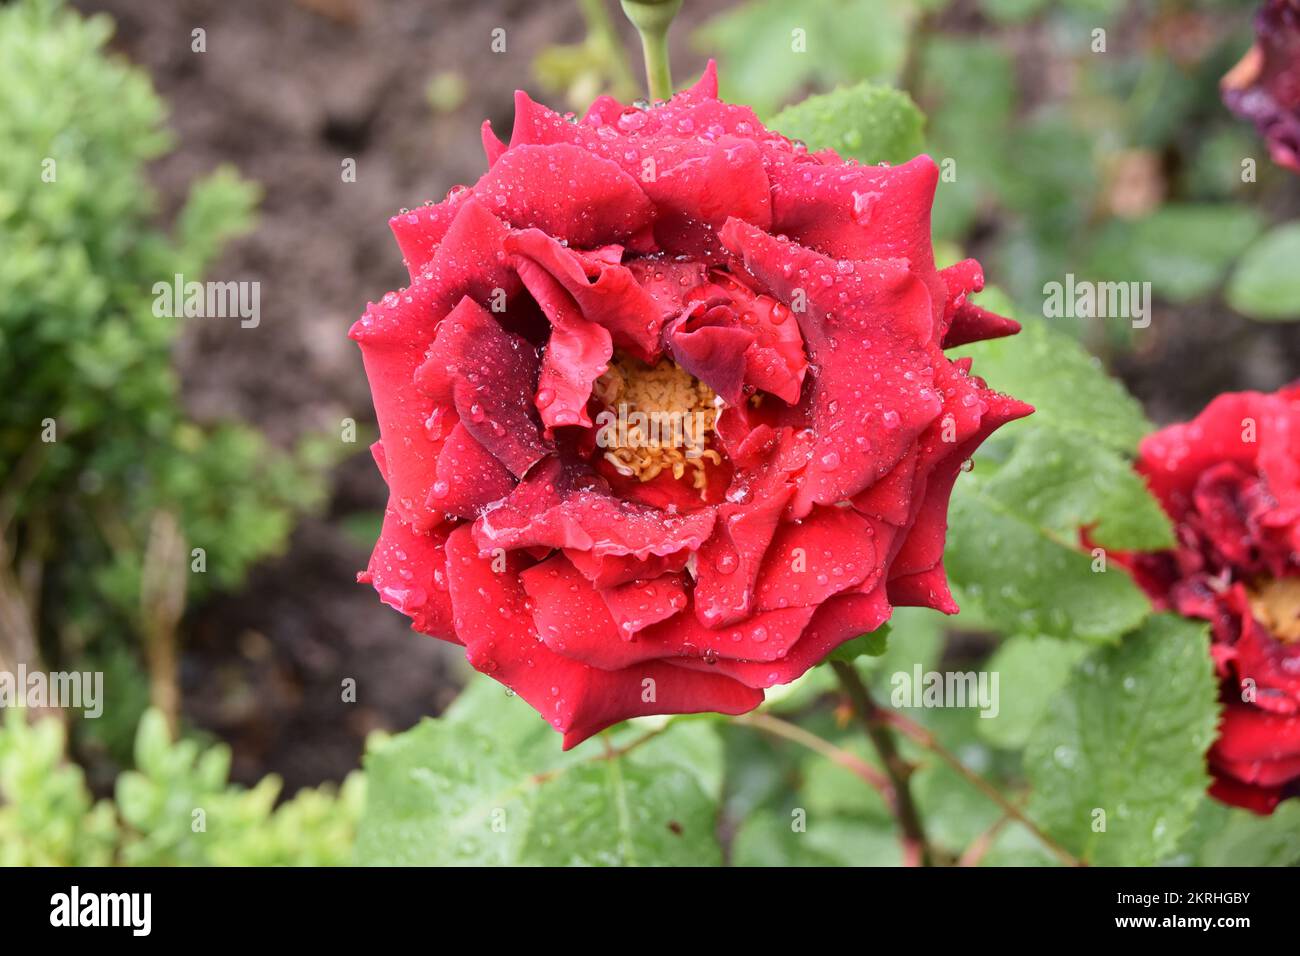 Rose flower in full blossom but some petals are slightly faded petals. Stock Photo